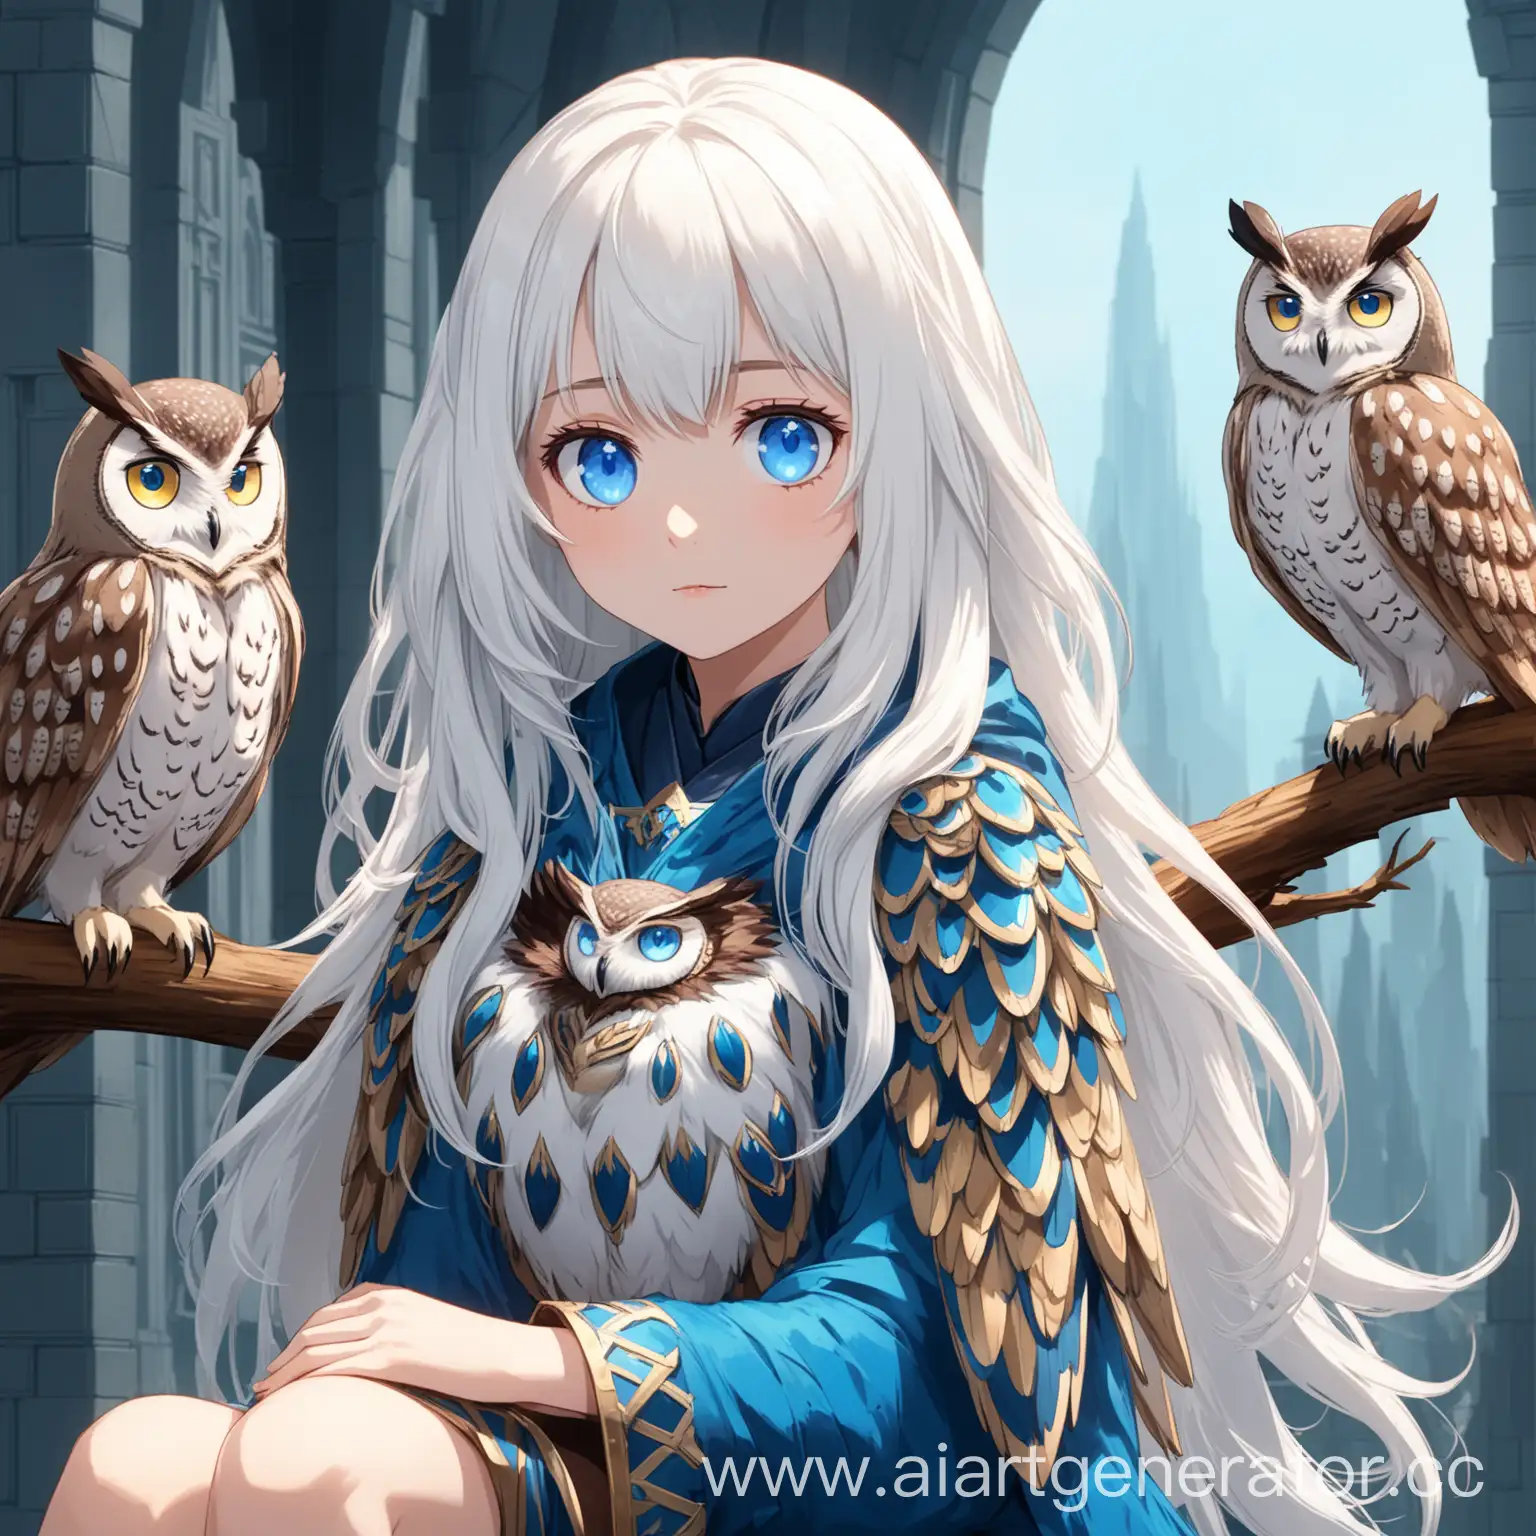 Enchanting-Girl-with-Long-White-Hair-and-Owl-Companion